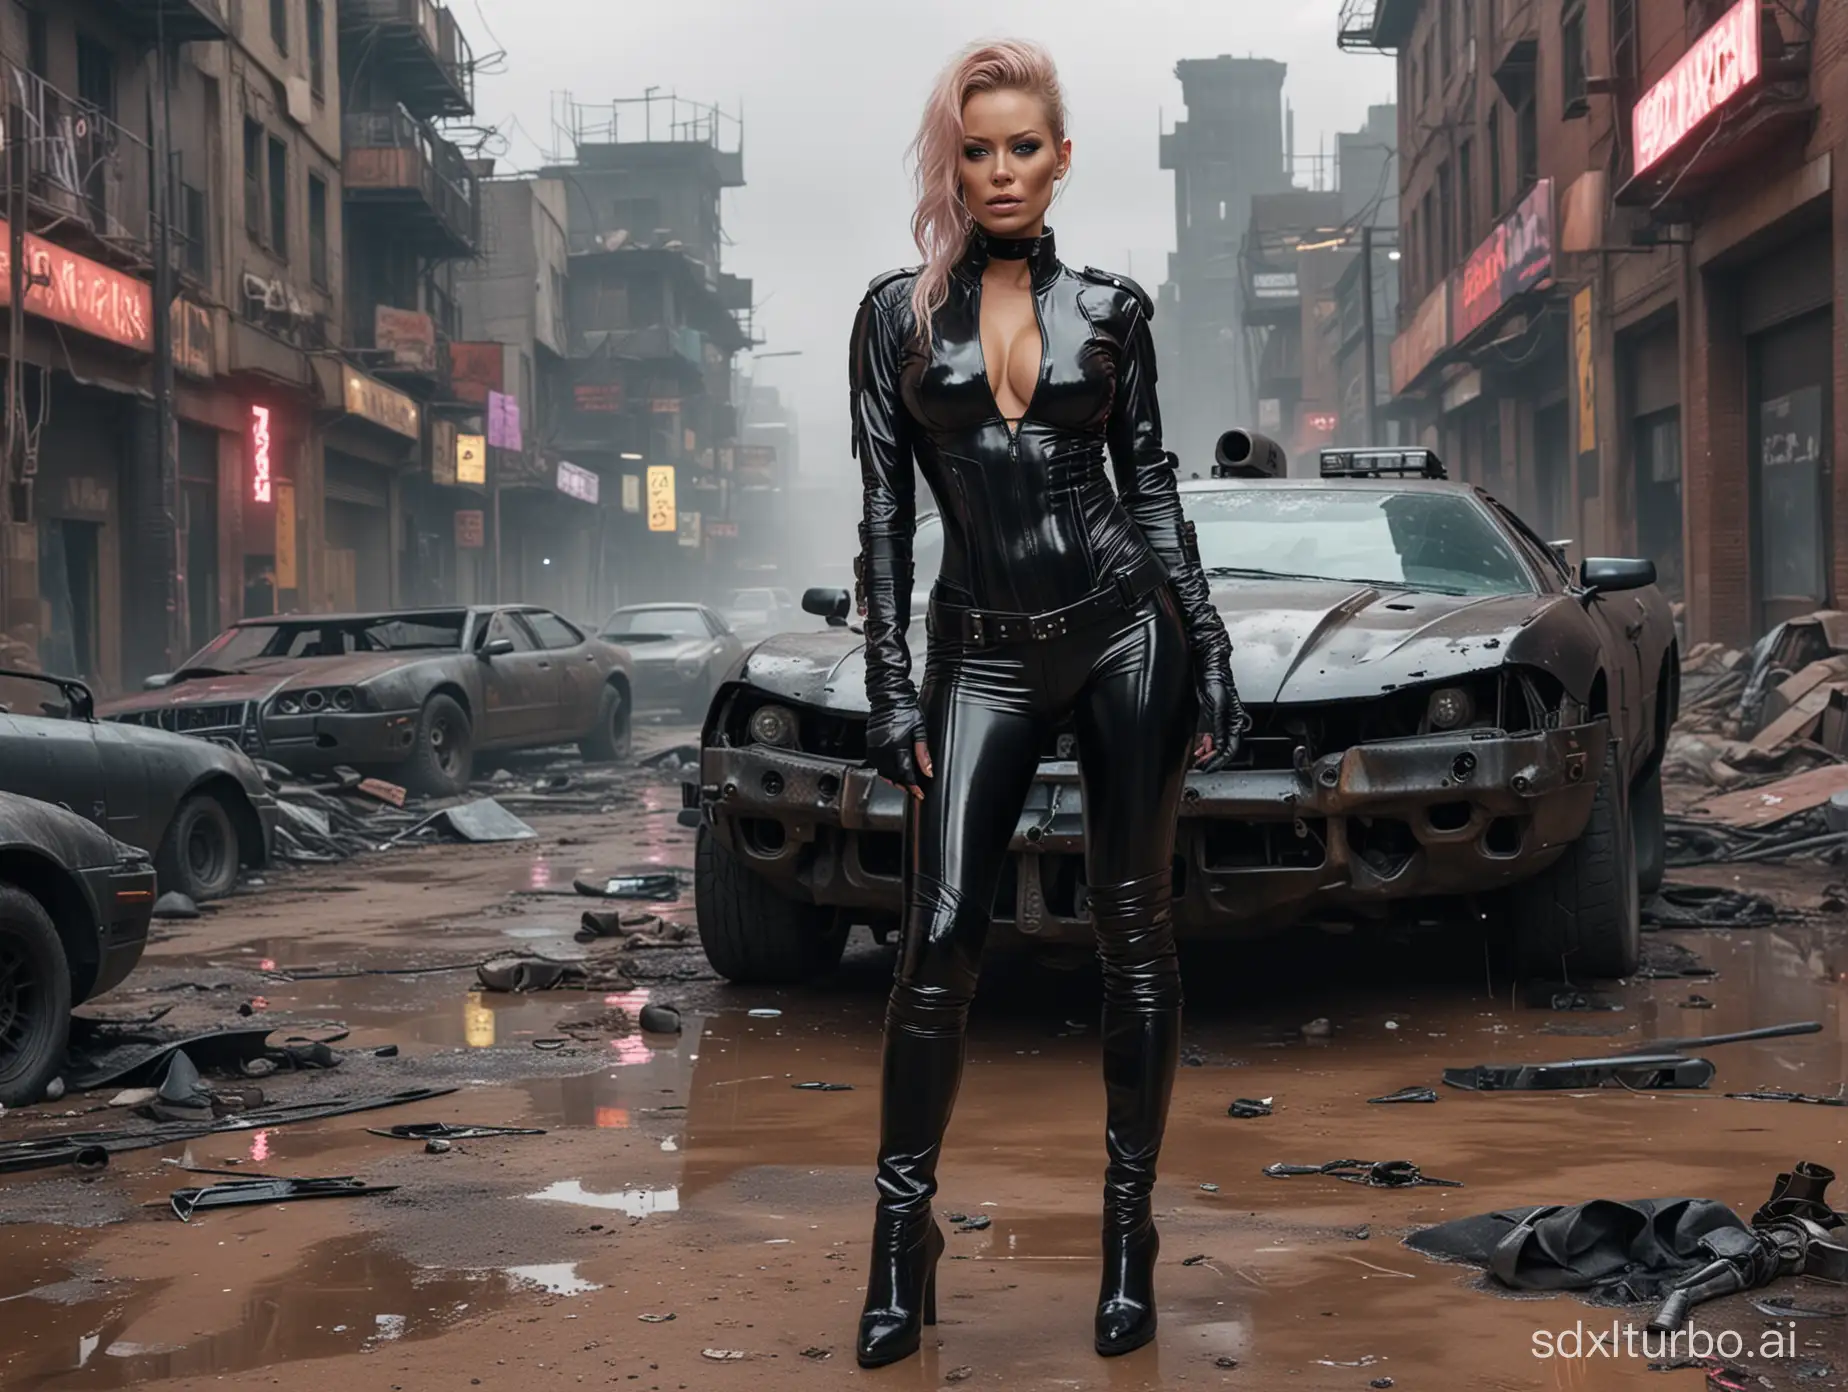 realistic hd photo , cyberpunk police jenna jameson standing , wearing black low-cut shinny pvc catsuit , wearing long shiny pvc gloves , wearing shinny pvc thigh high boots , in cyberpunk destroyed city with mad max car , inlighted by neons ,